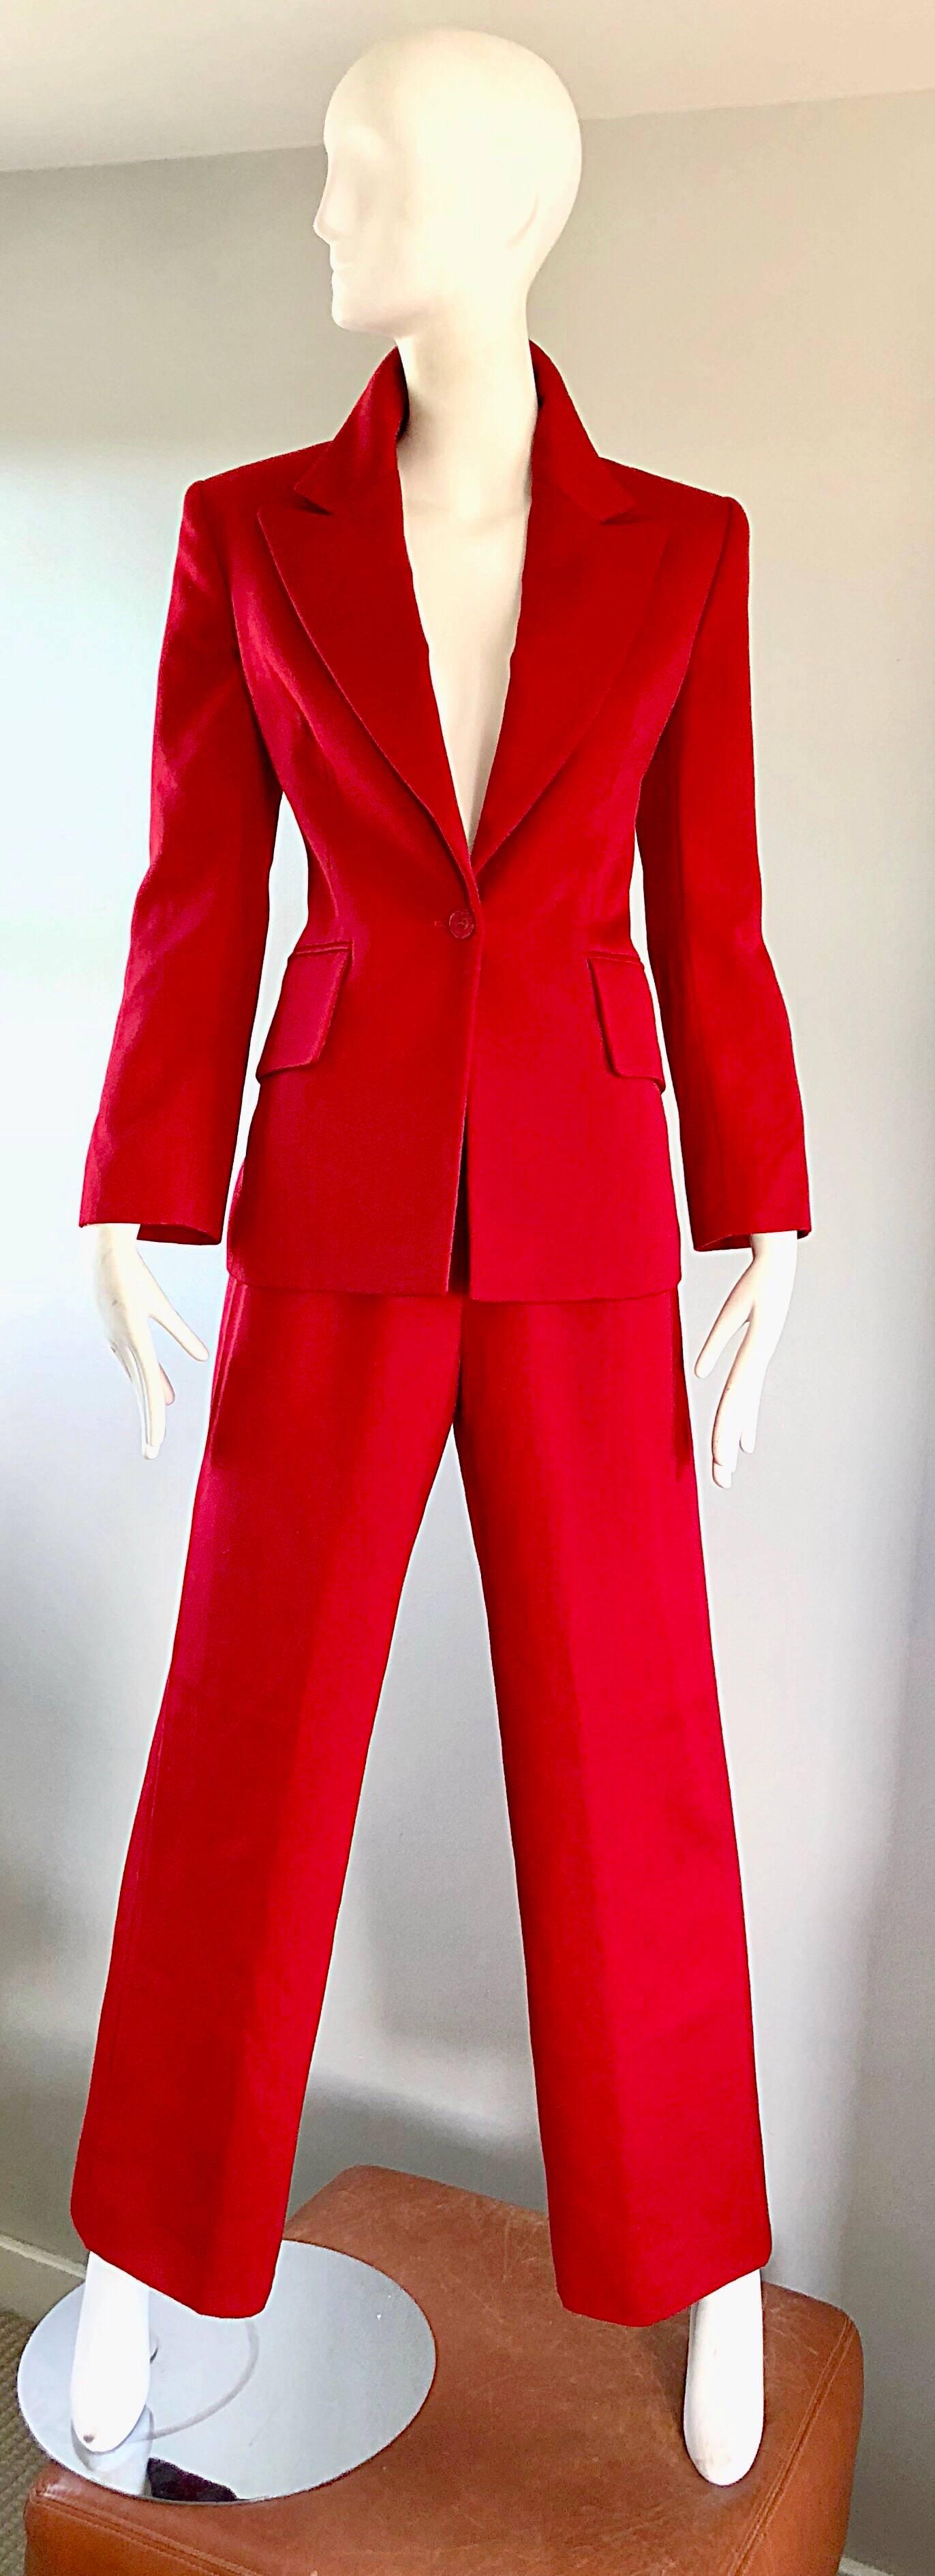 Wonderful early 90s ISAAC MIZRAHI lipstick red wool (Woolmark) wide leg tailored le smoking trouser suit! Features a smart tailored one button blazer, with wide collar lapels. Pocket at each side of the waist. Vent at back hem. Chic wide leg high